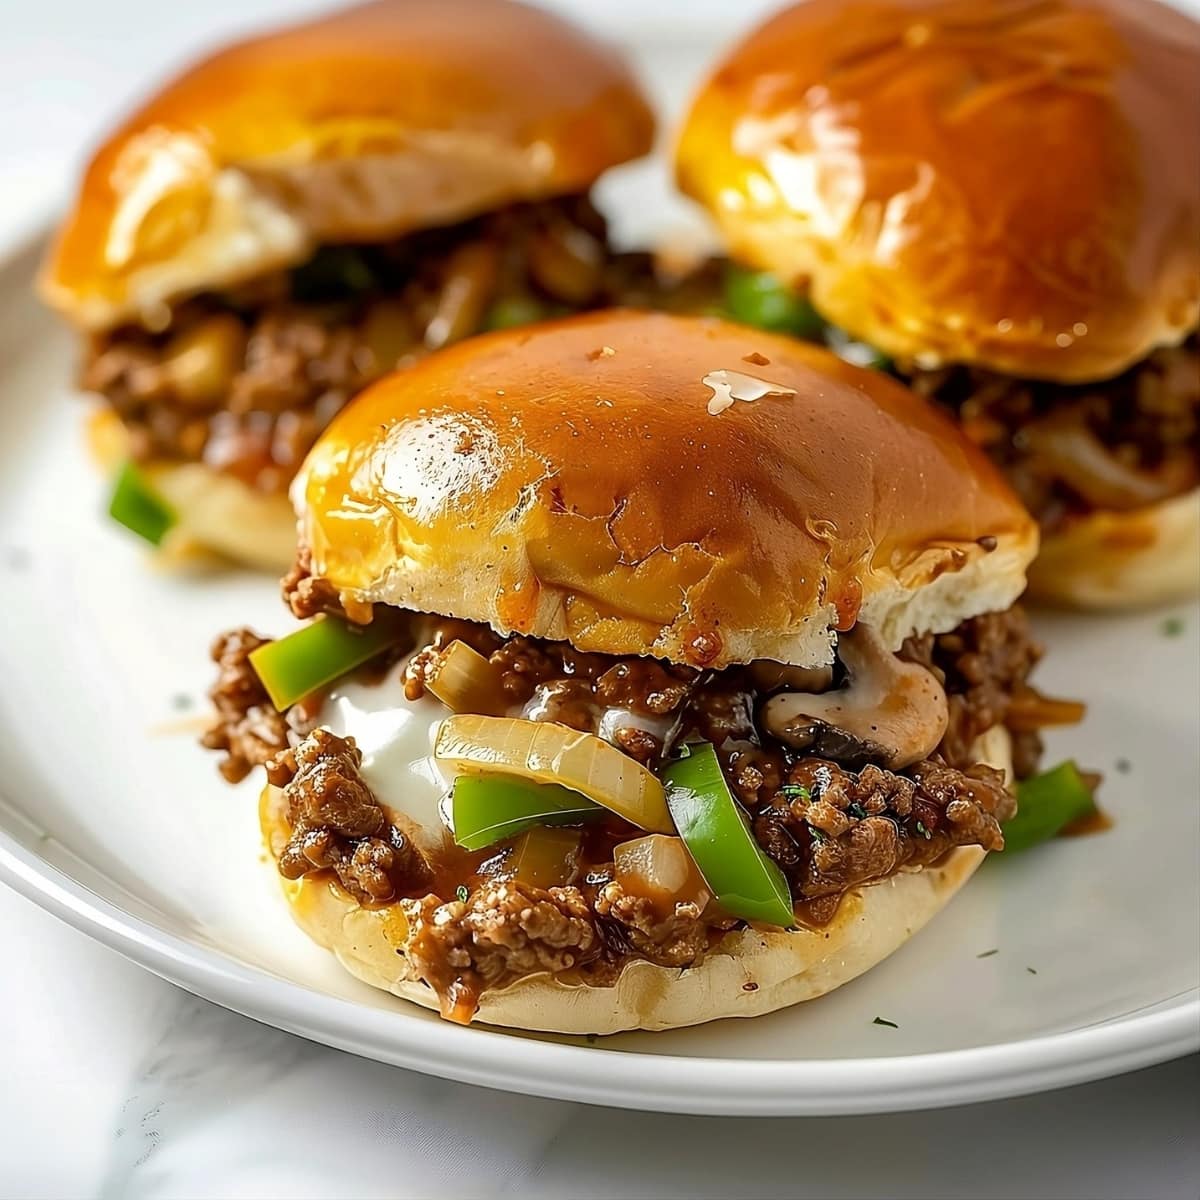 Philly Cheesesteak Sloppy Joes with ground beef, mushroom, onions and green bell pepper on a white plate.